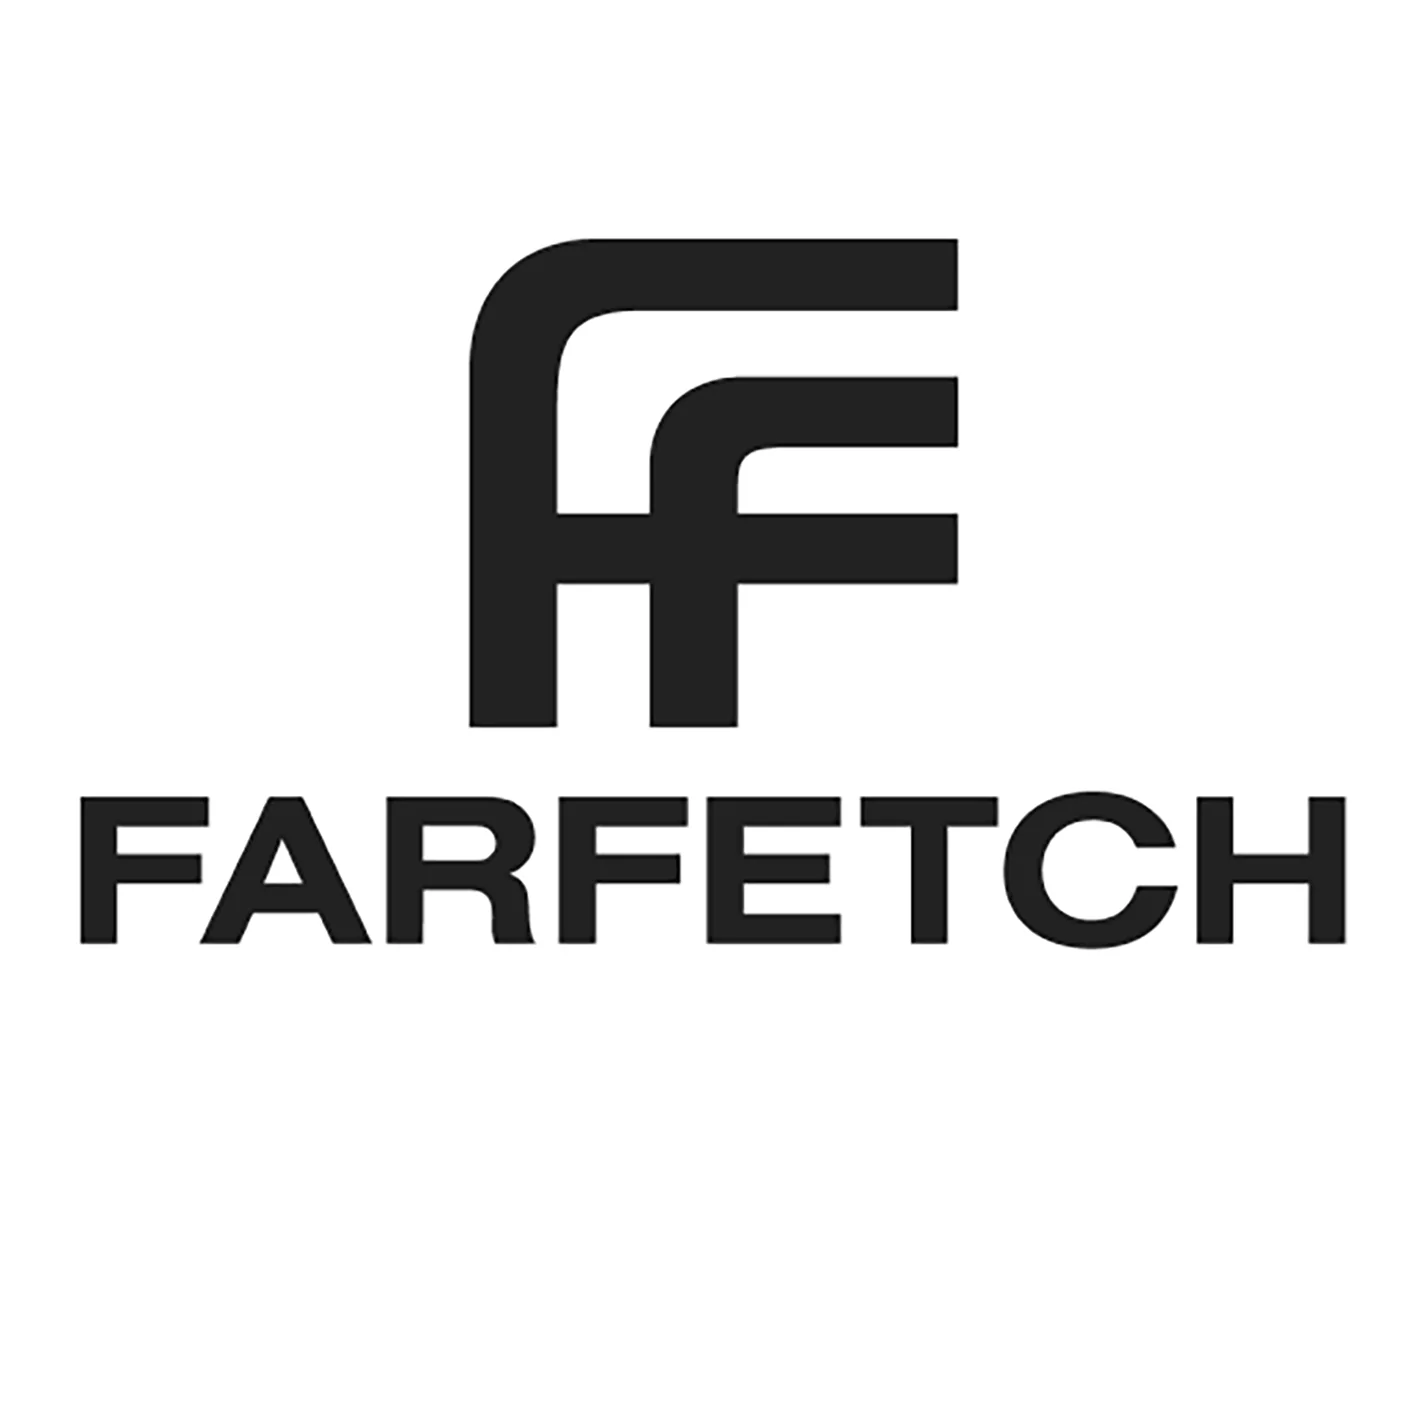 Farfetch coupons & discounts